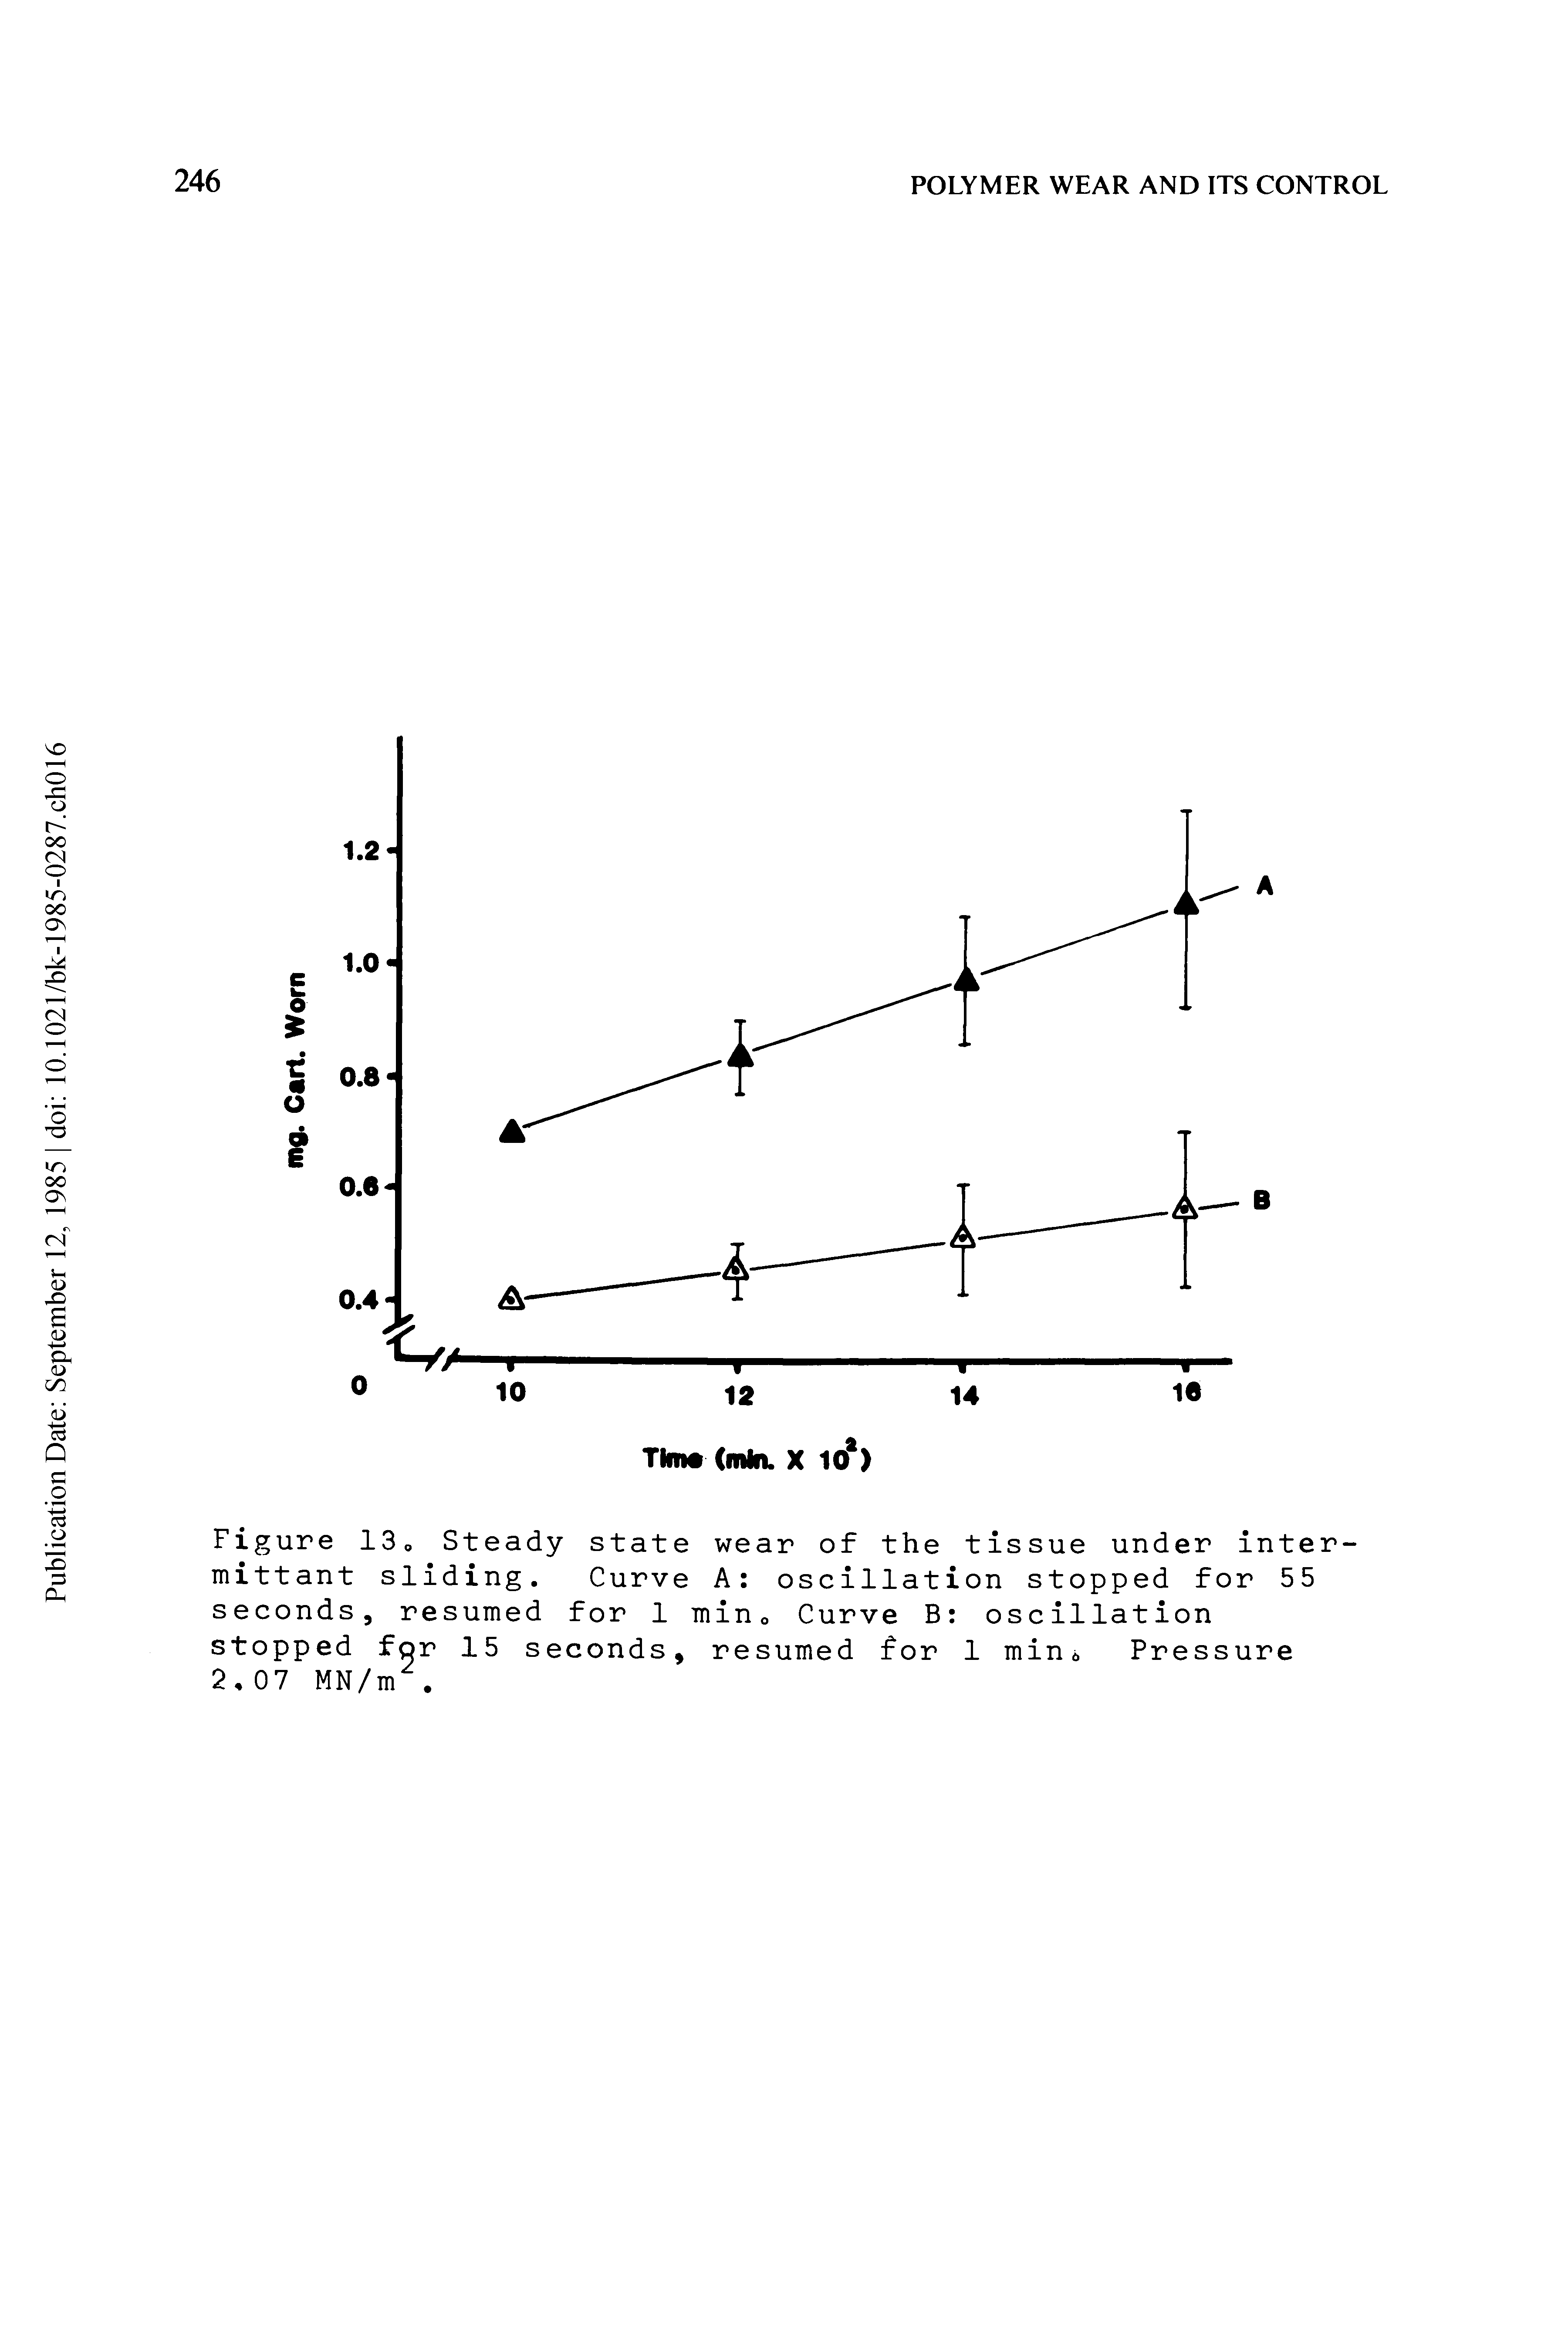 Figure 13o Steady state wear of the tissue under inter-mittant sliding. Curve A oscillation stopped for 55 seconds, resumed for 1 miuo Curve B oscillation stopped for 15 seconds, resumed for 1 minb Pressure 2,07 MN/m. ...